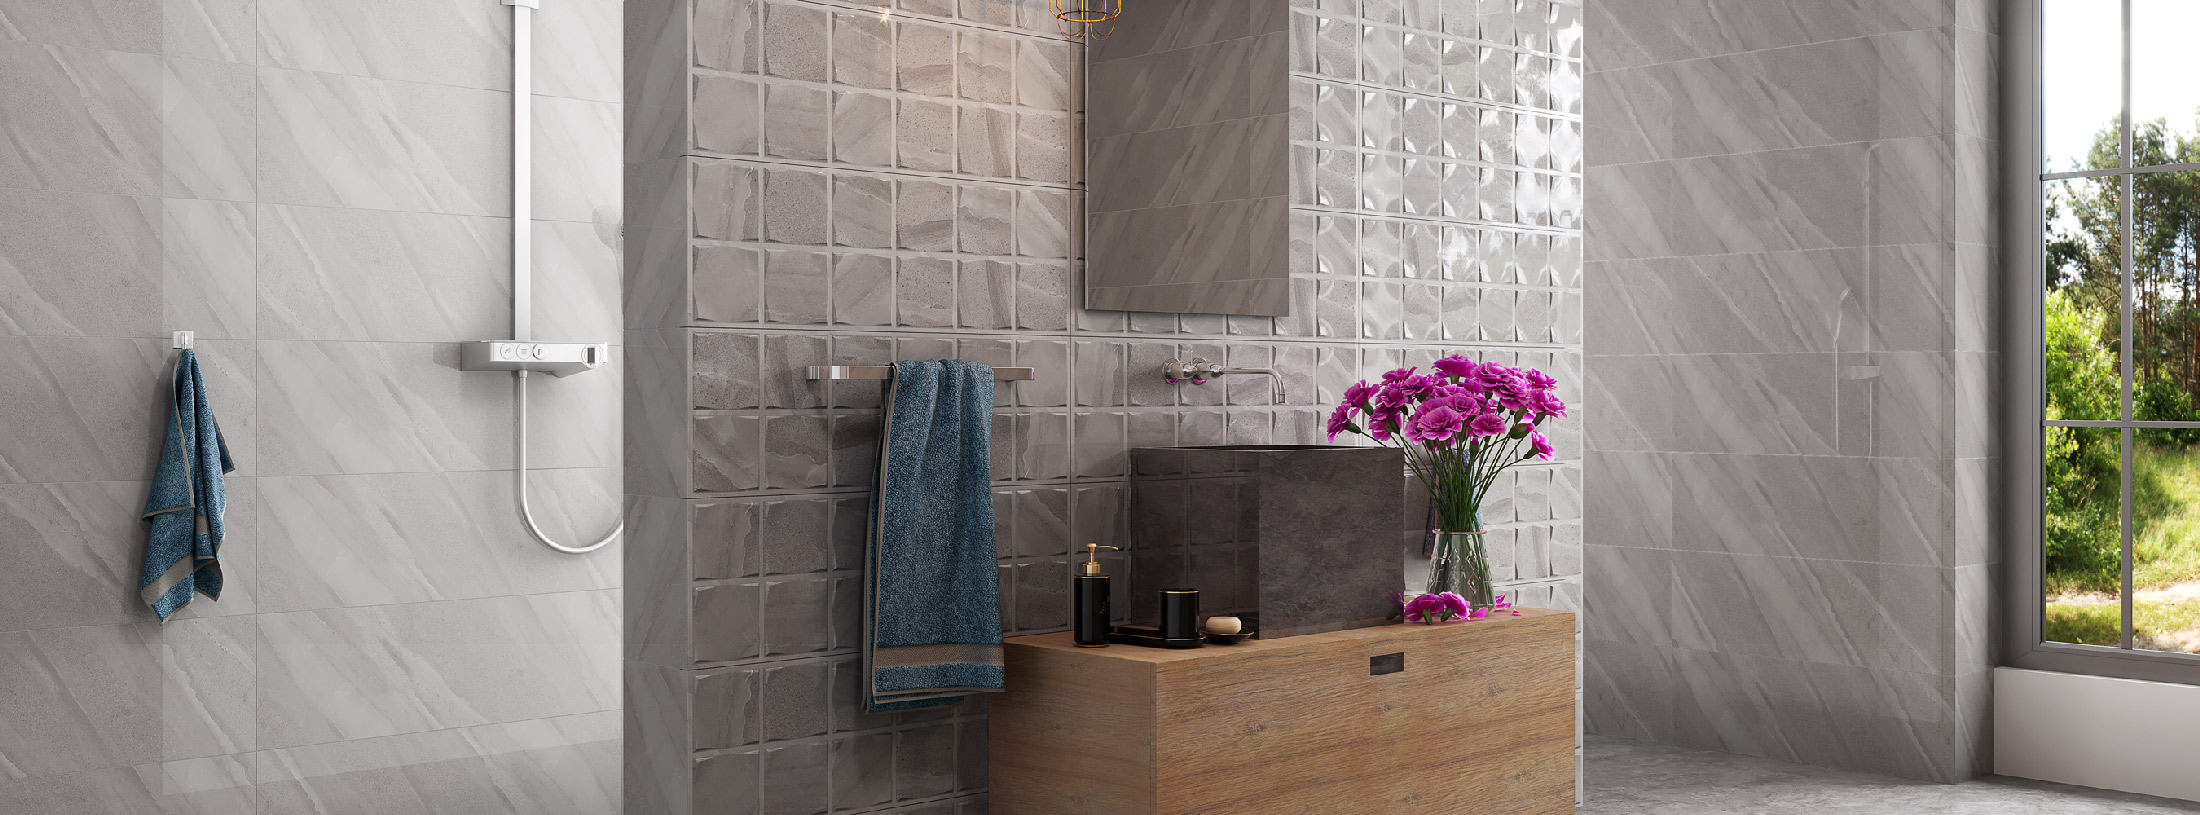 Duster wall tile